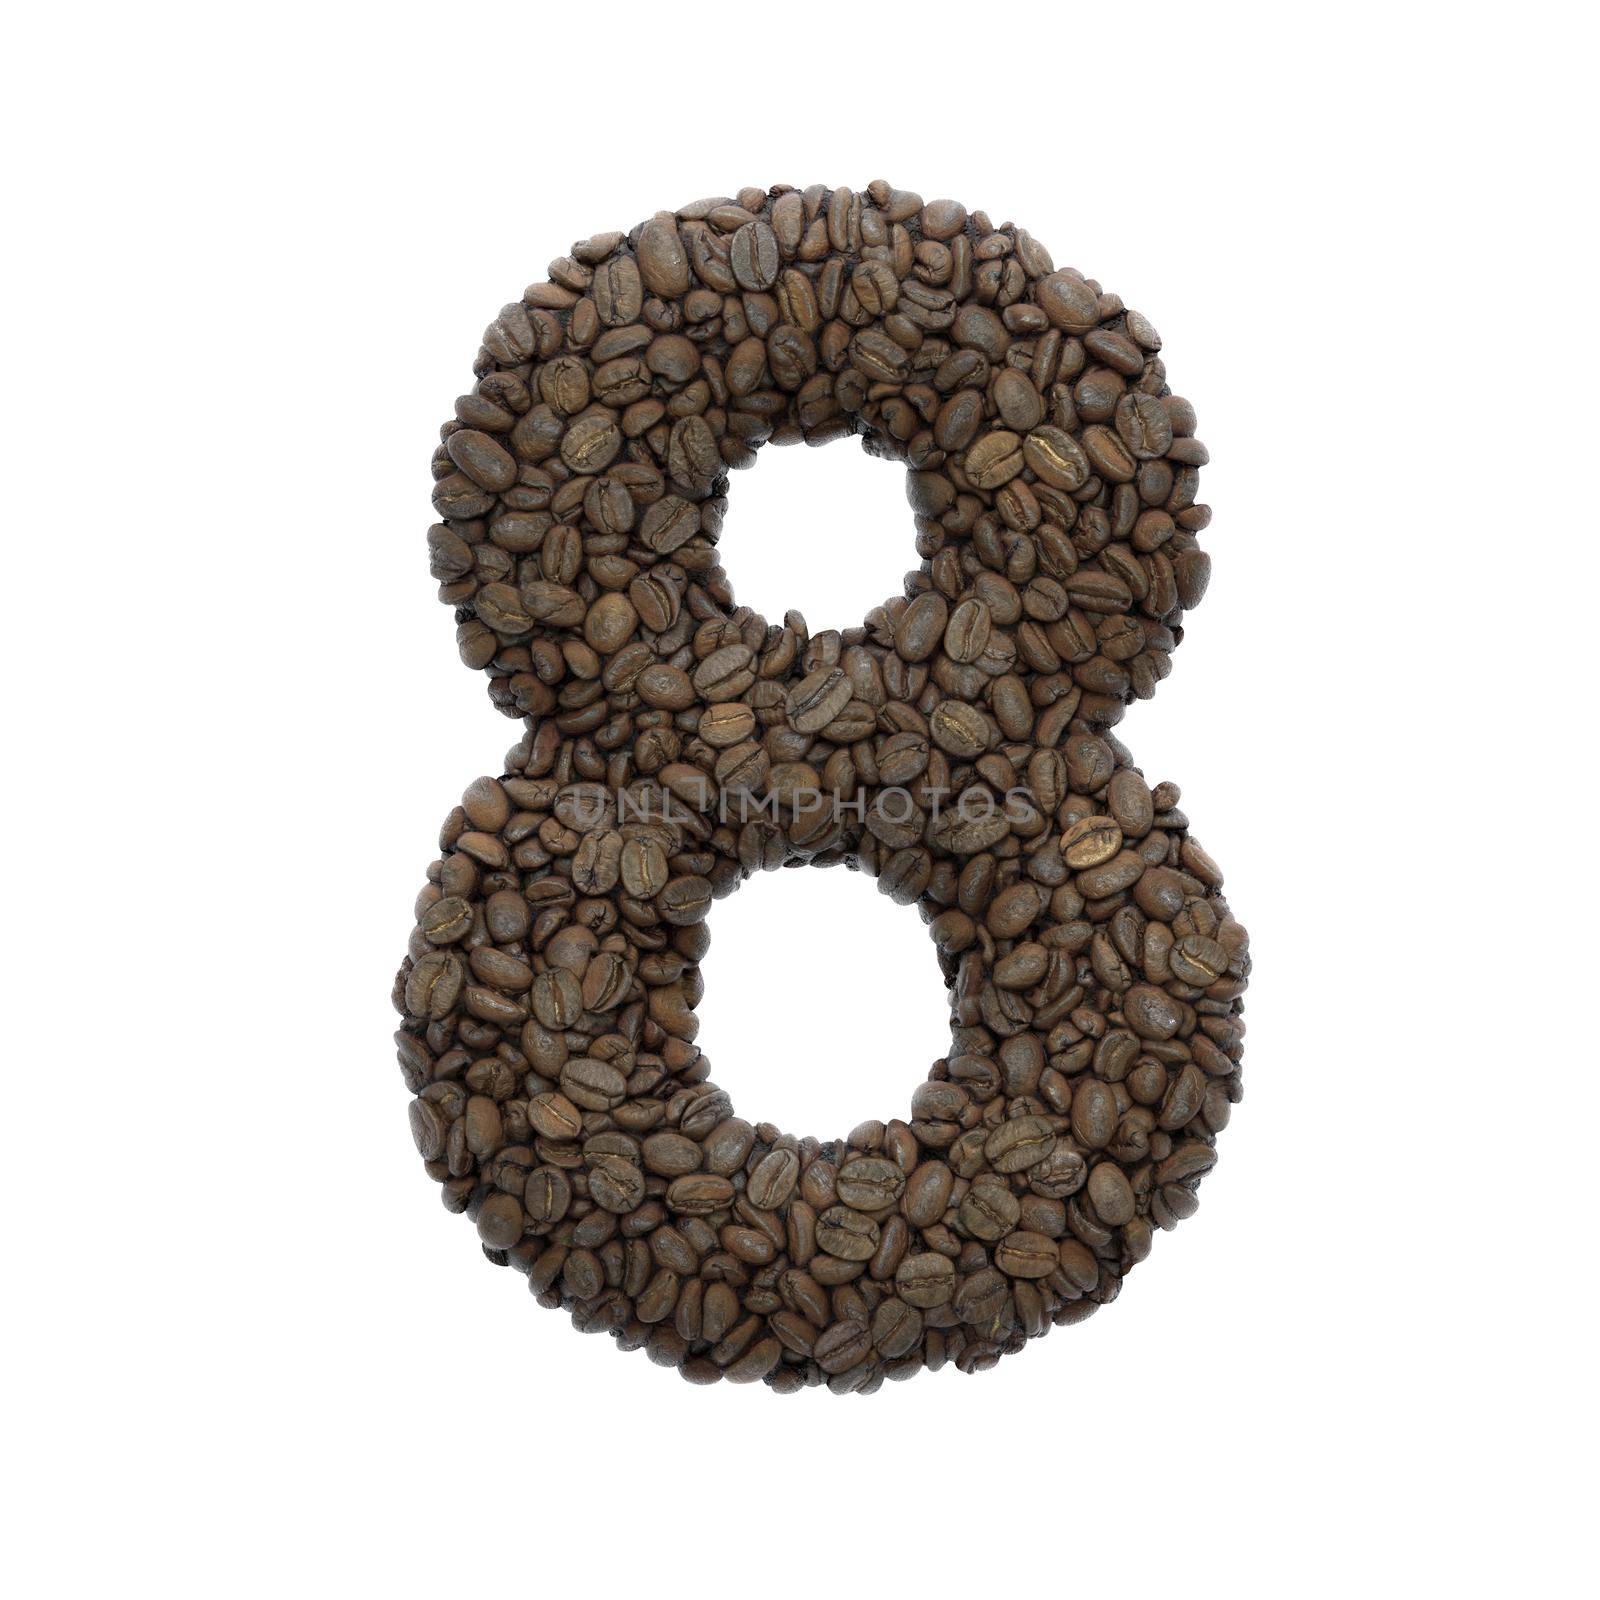 Coffee number 8 -  3d roasted beans digit - Suitable for Coffee, energy or insomnia related subjects by chrisroll